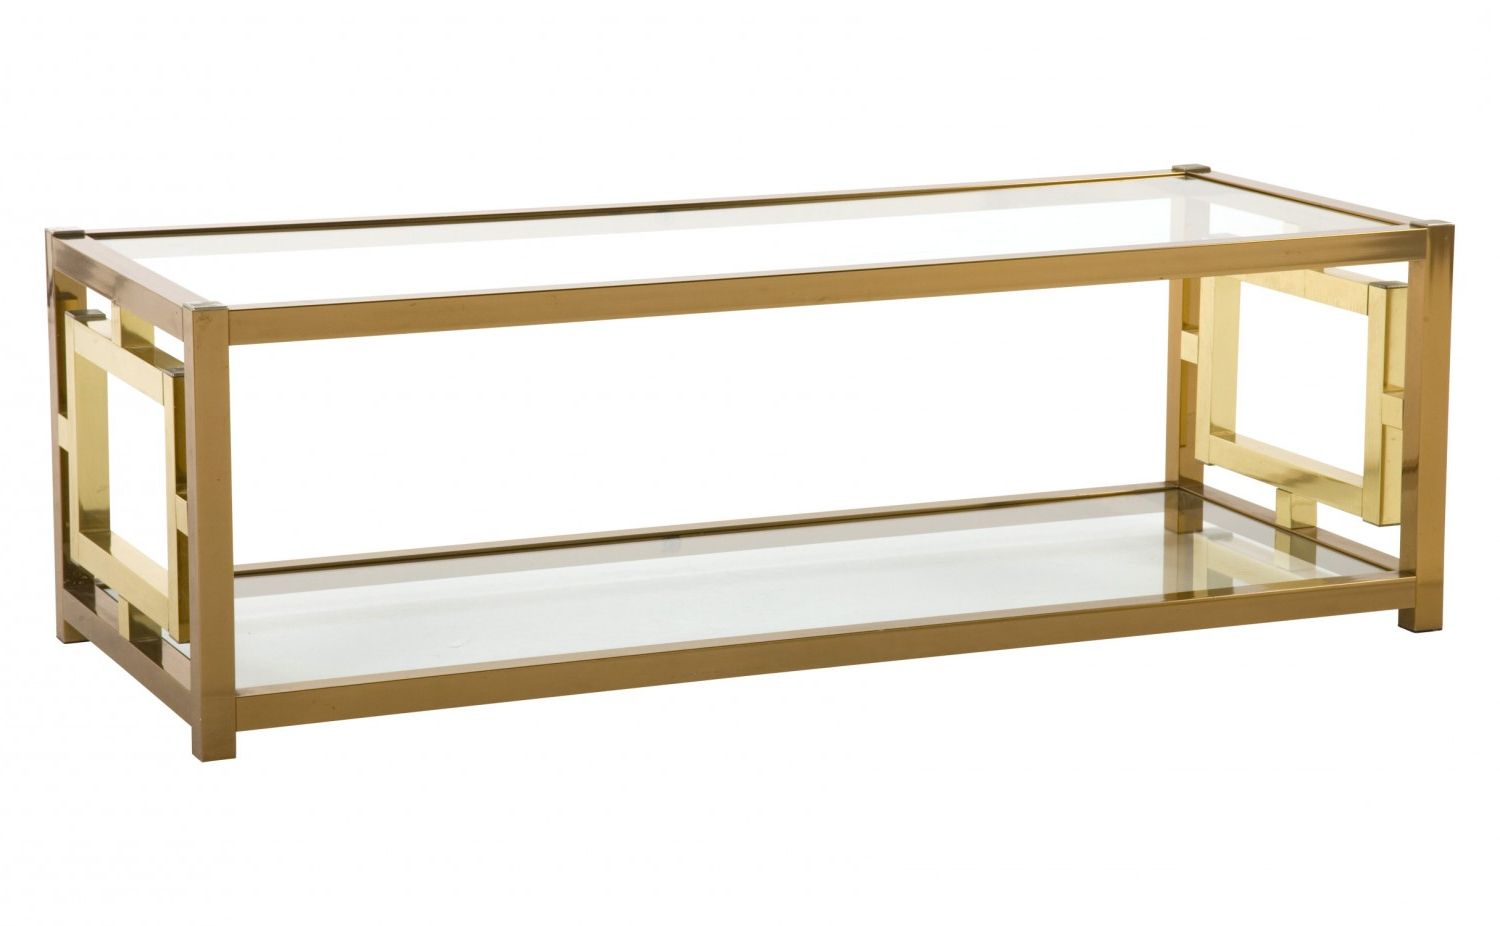 Jayson Home Pertaining To Current Rectangular Coffee Tables With Brass Legs (View 12 of 20)